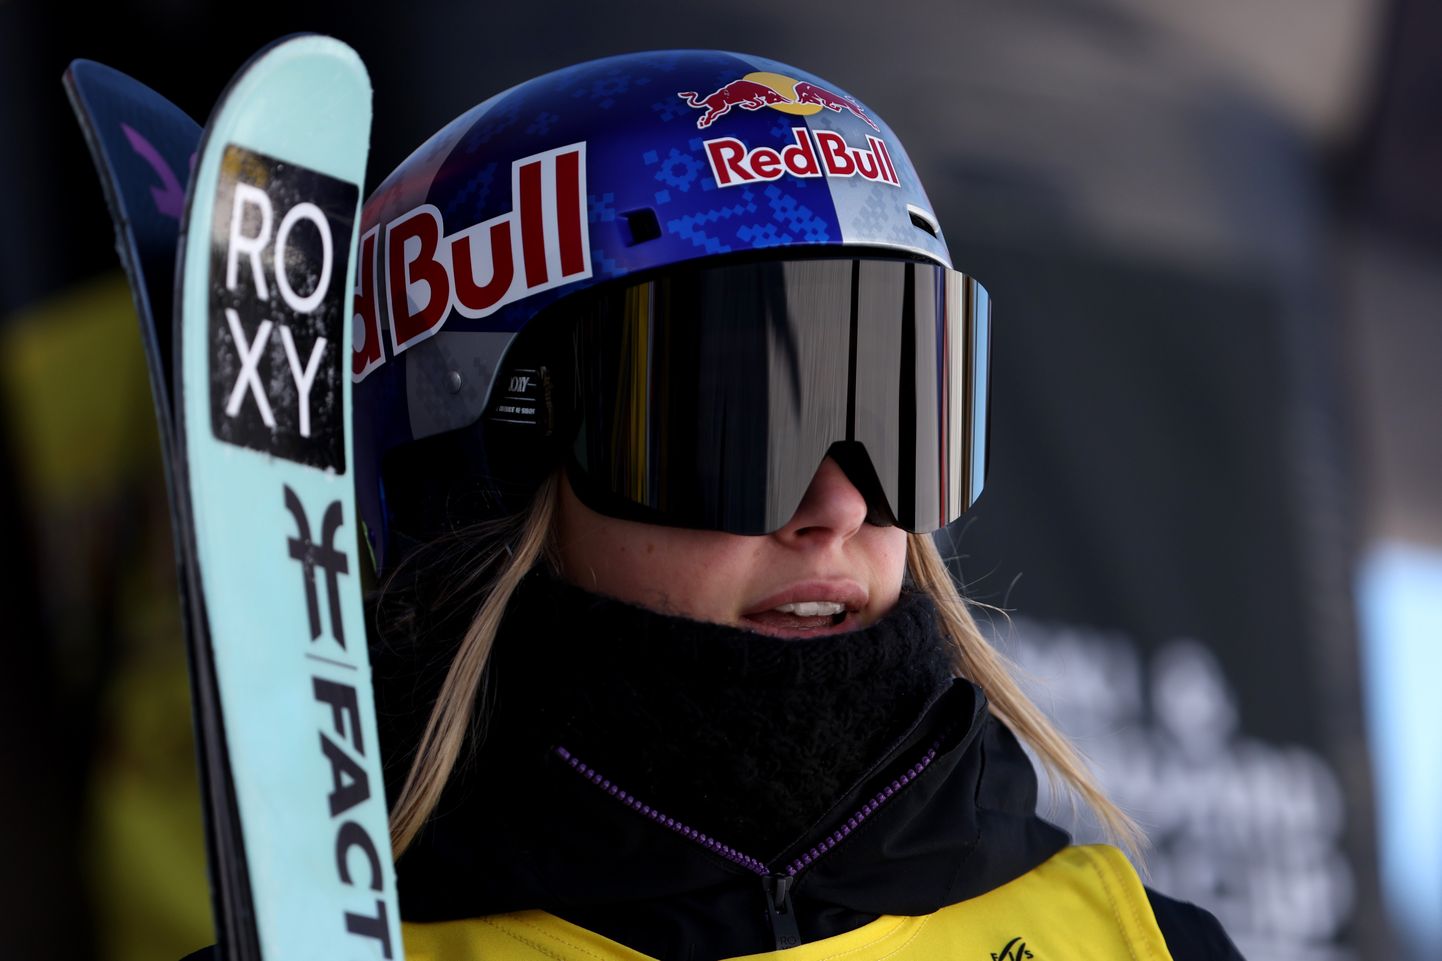 MAMMOTH, CALIFORNIA - JANUARY 09: Kelly Sildaru of Team Estonia looks on during the Women's Freeski Slopestyle Final at the Toyota U.S. Grand Prix at Mammoth Mountain on January 09, 2022 in Mammoth, California.   Maddie Meyer/Getty Images/AFP
== FOR NEWSPAPERS, INTERNET, TELCOS & TELEVISION USE ONLY ==